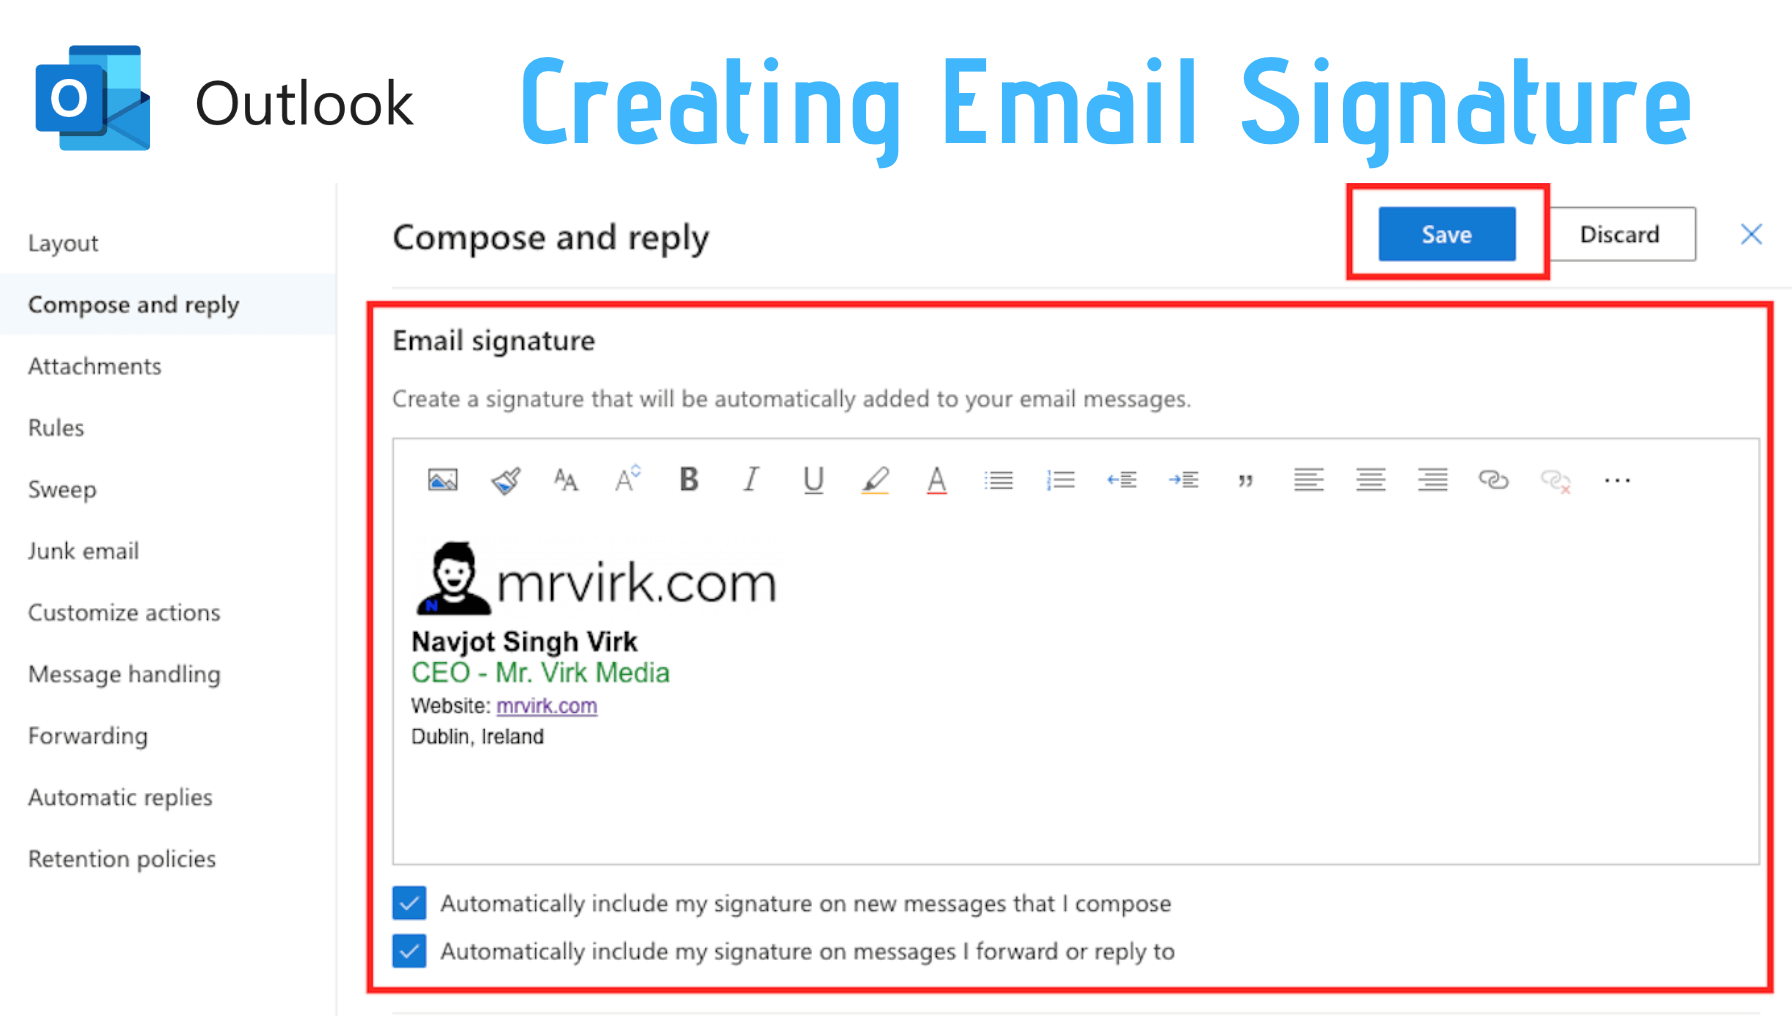 How to Create Email Signature in Outlook/Office 365 - Step by Step